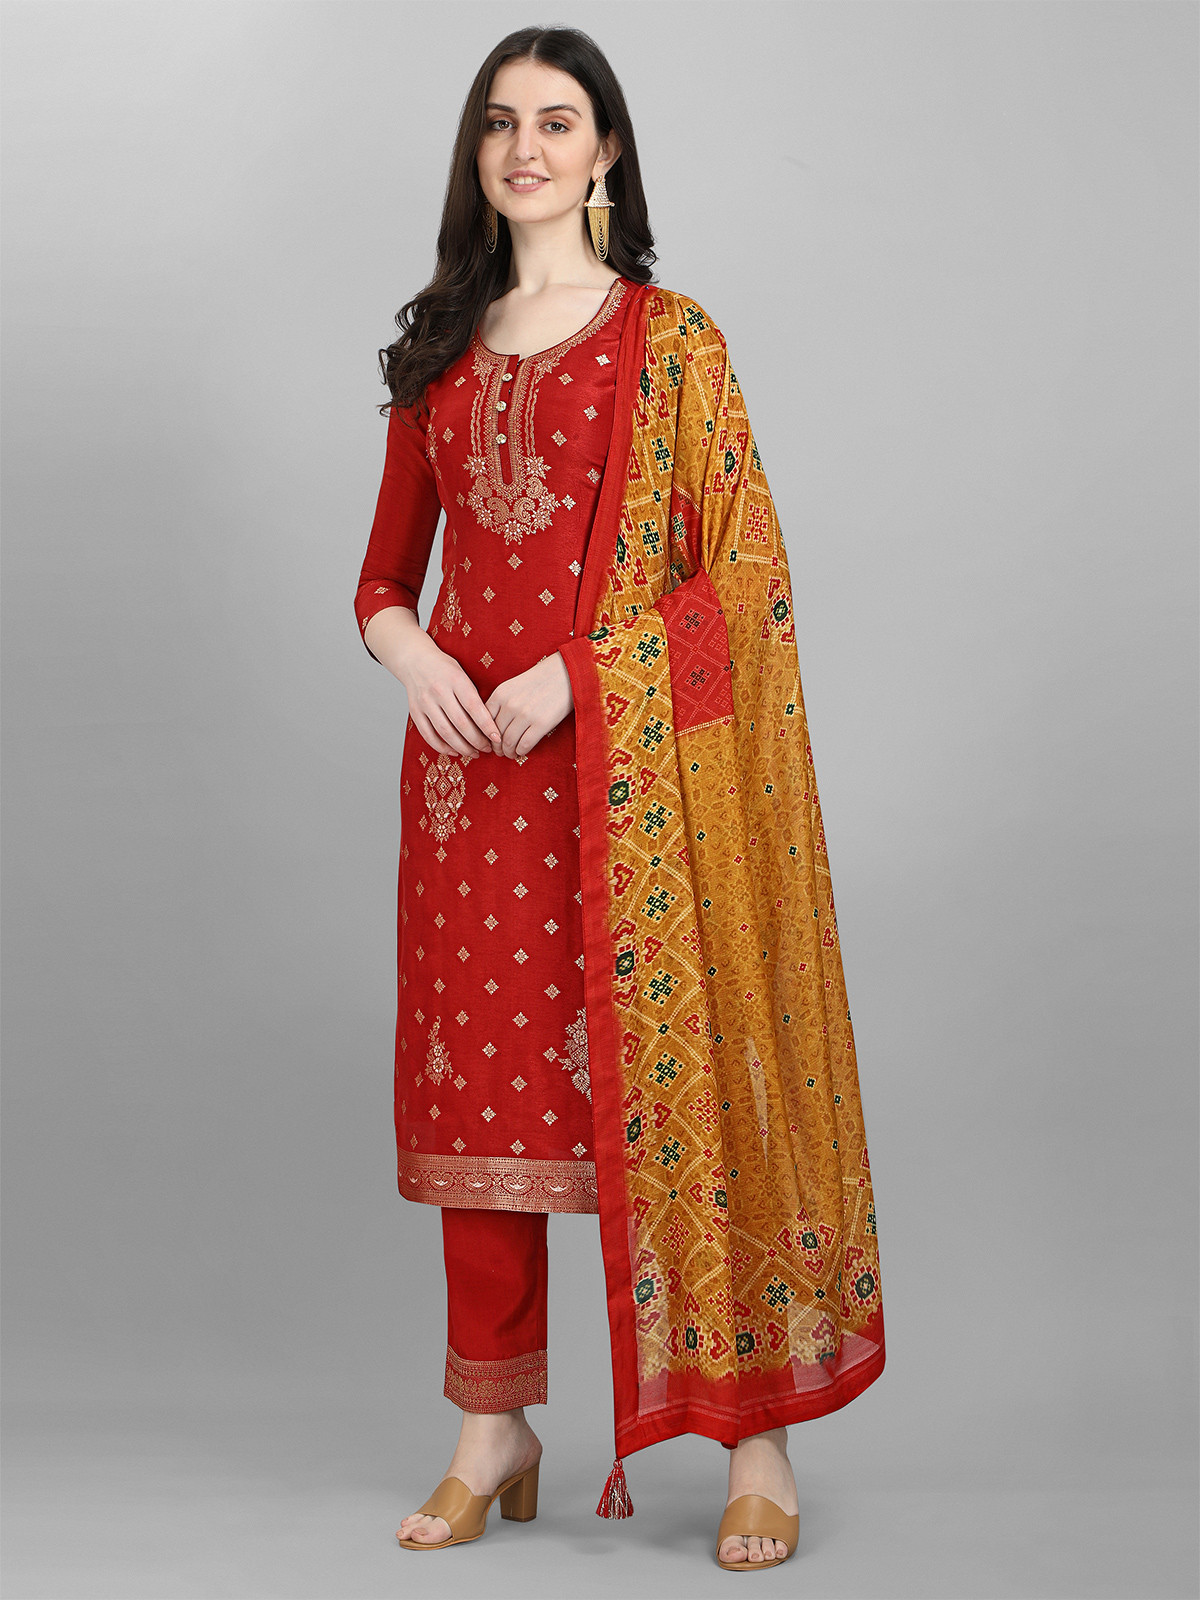 red salwar suit eid outfits